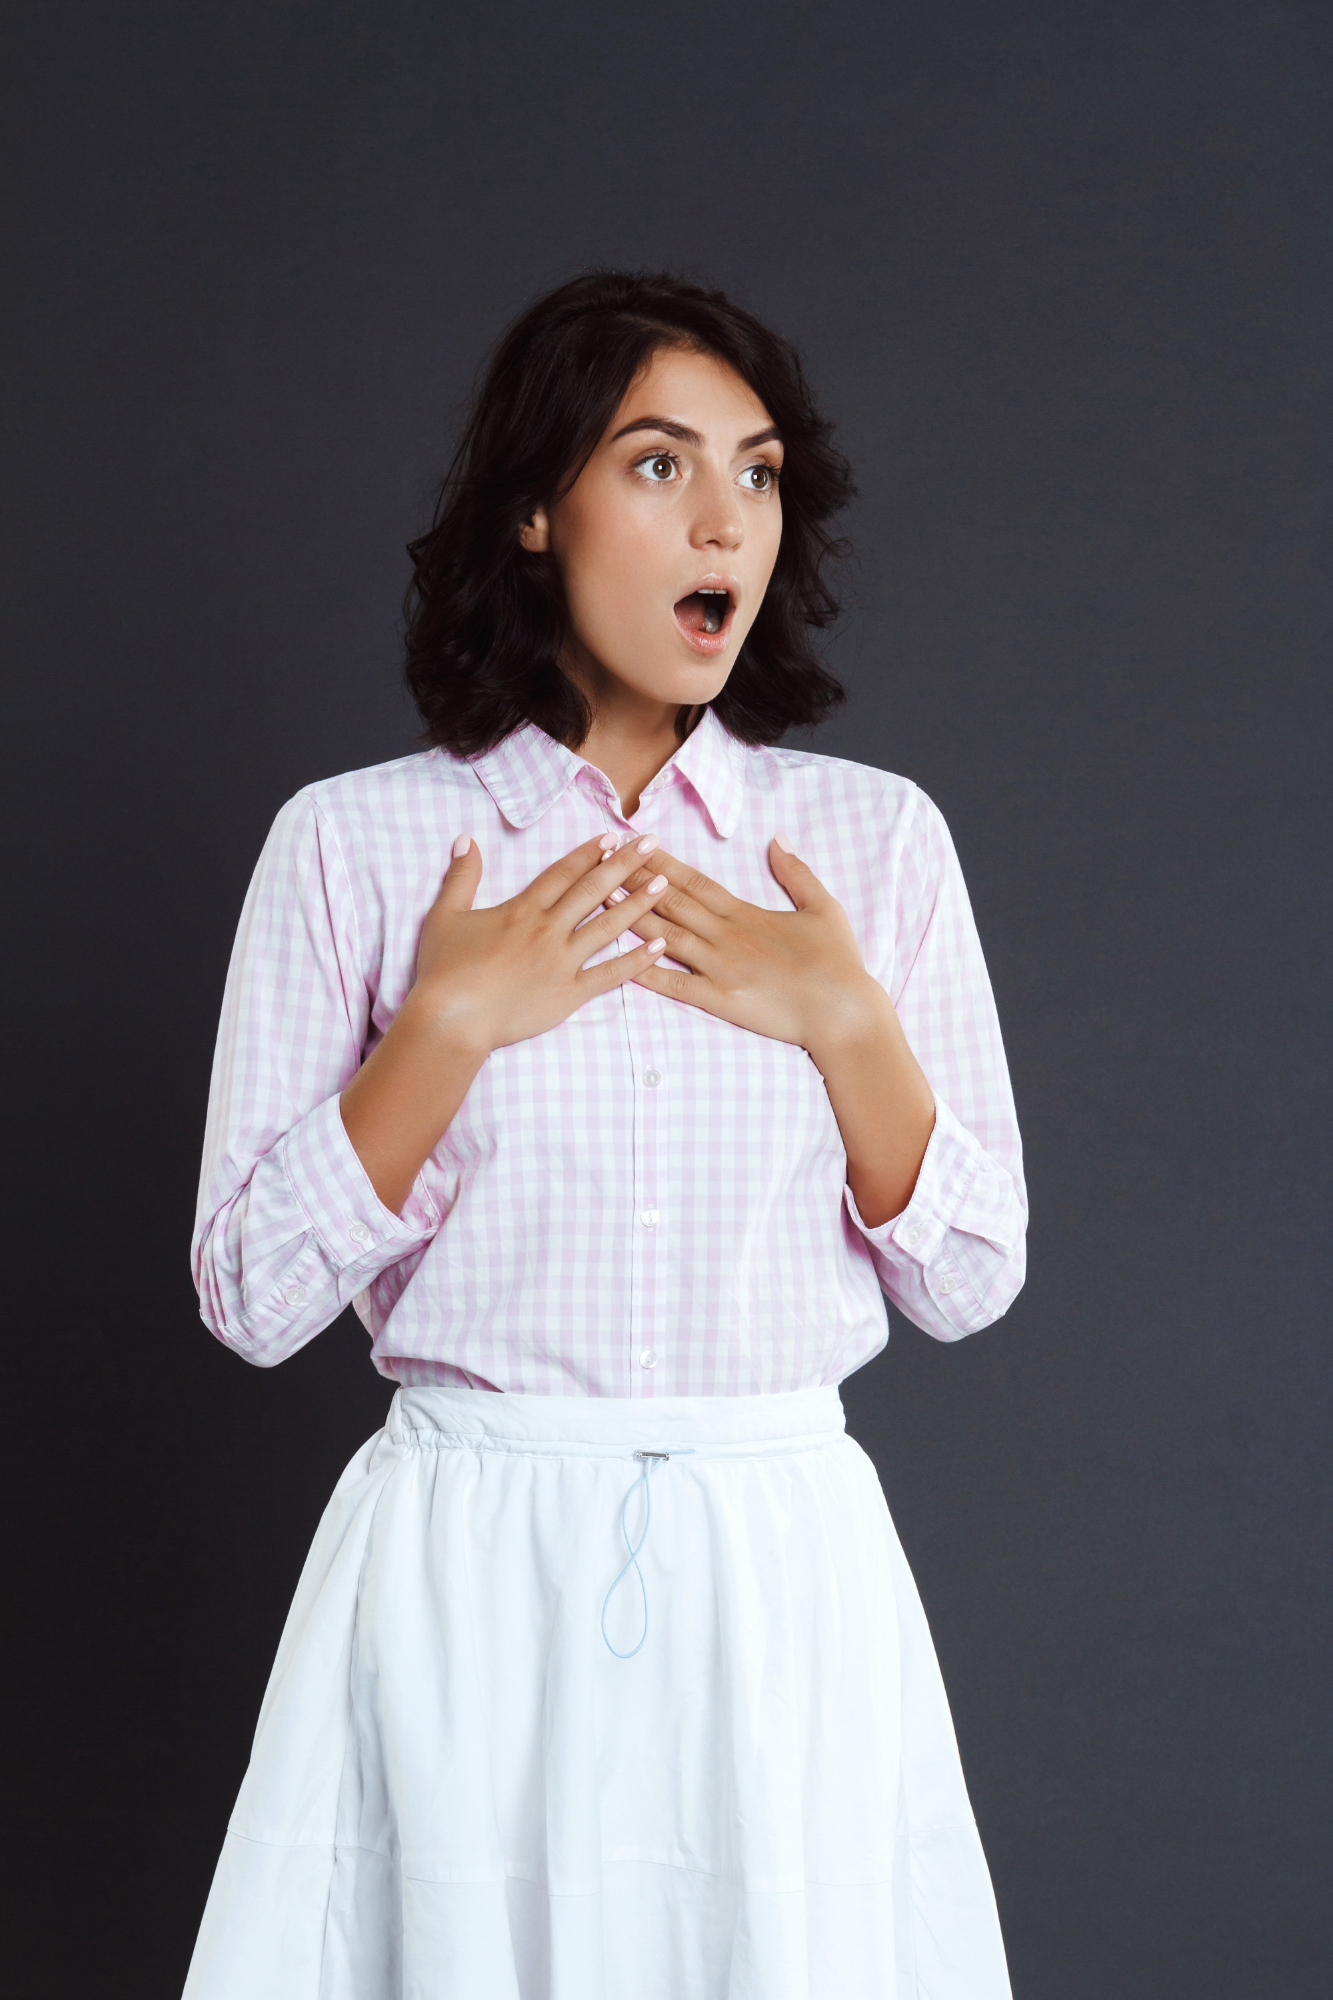 A woman acting surprised and innocent with her hands on her chest | Source: Pexels